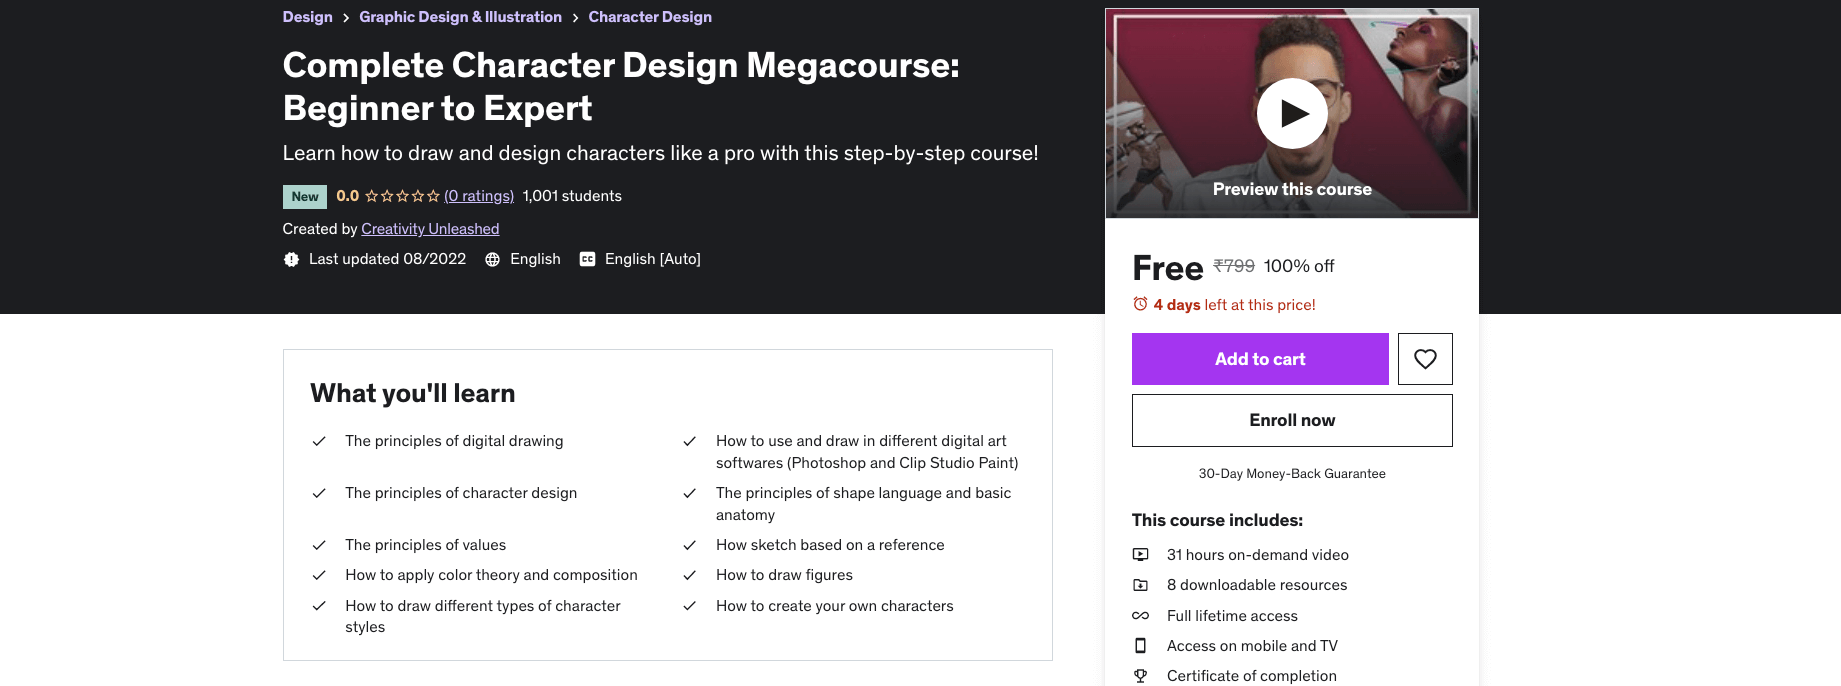 Complete Character Design Megacourse: Beginner to Expert